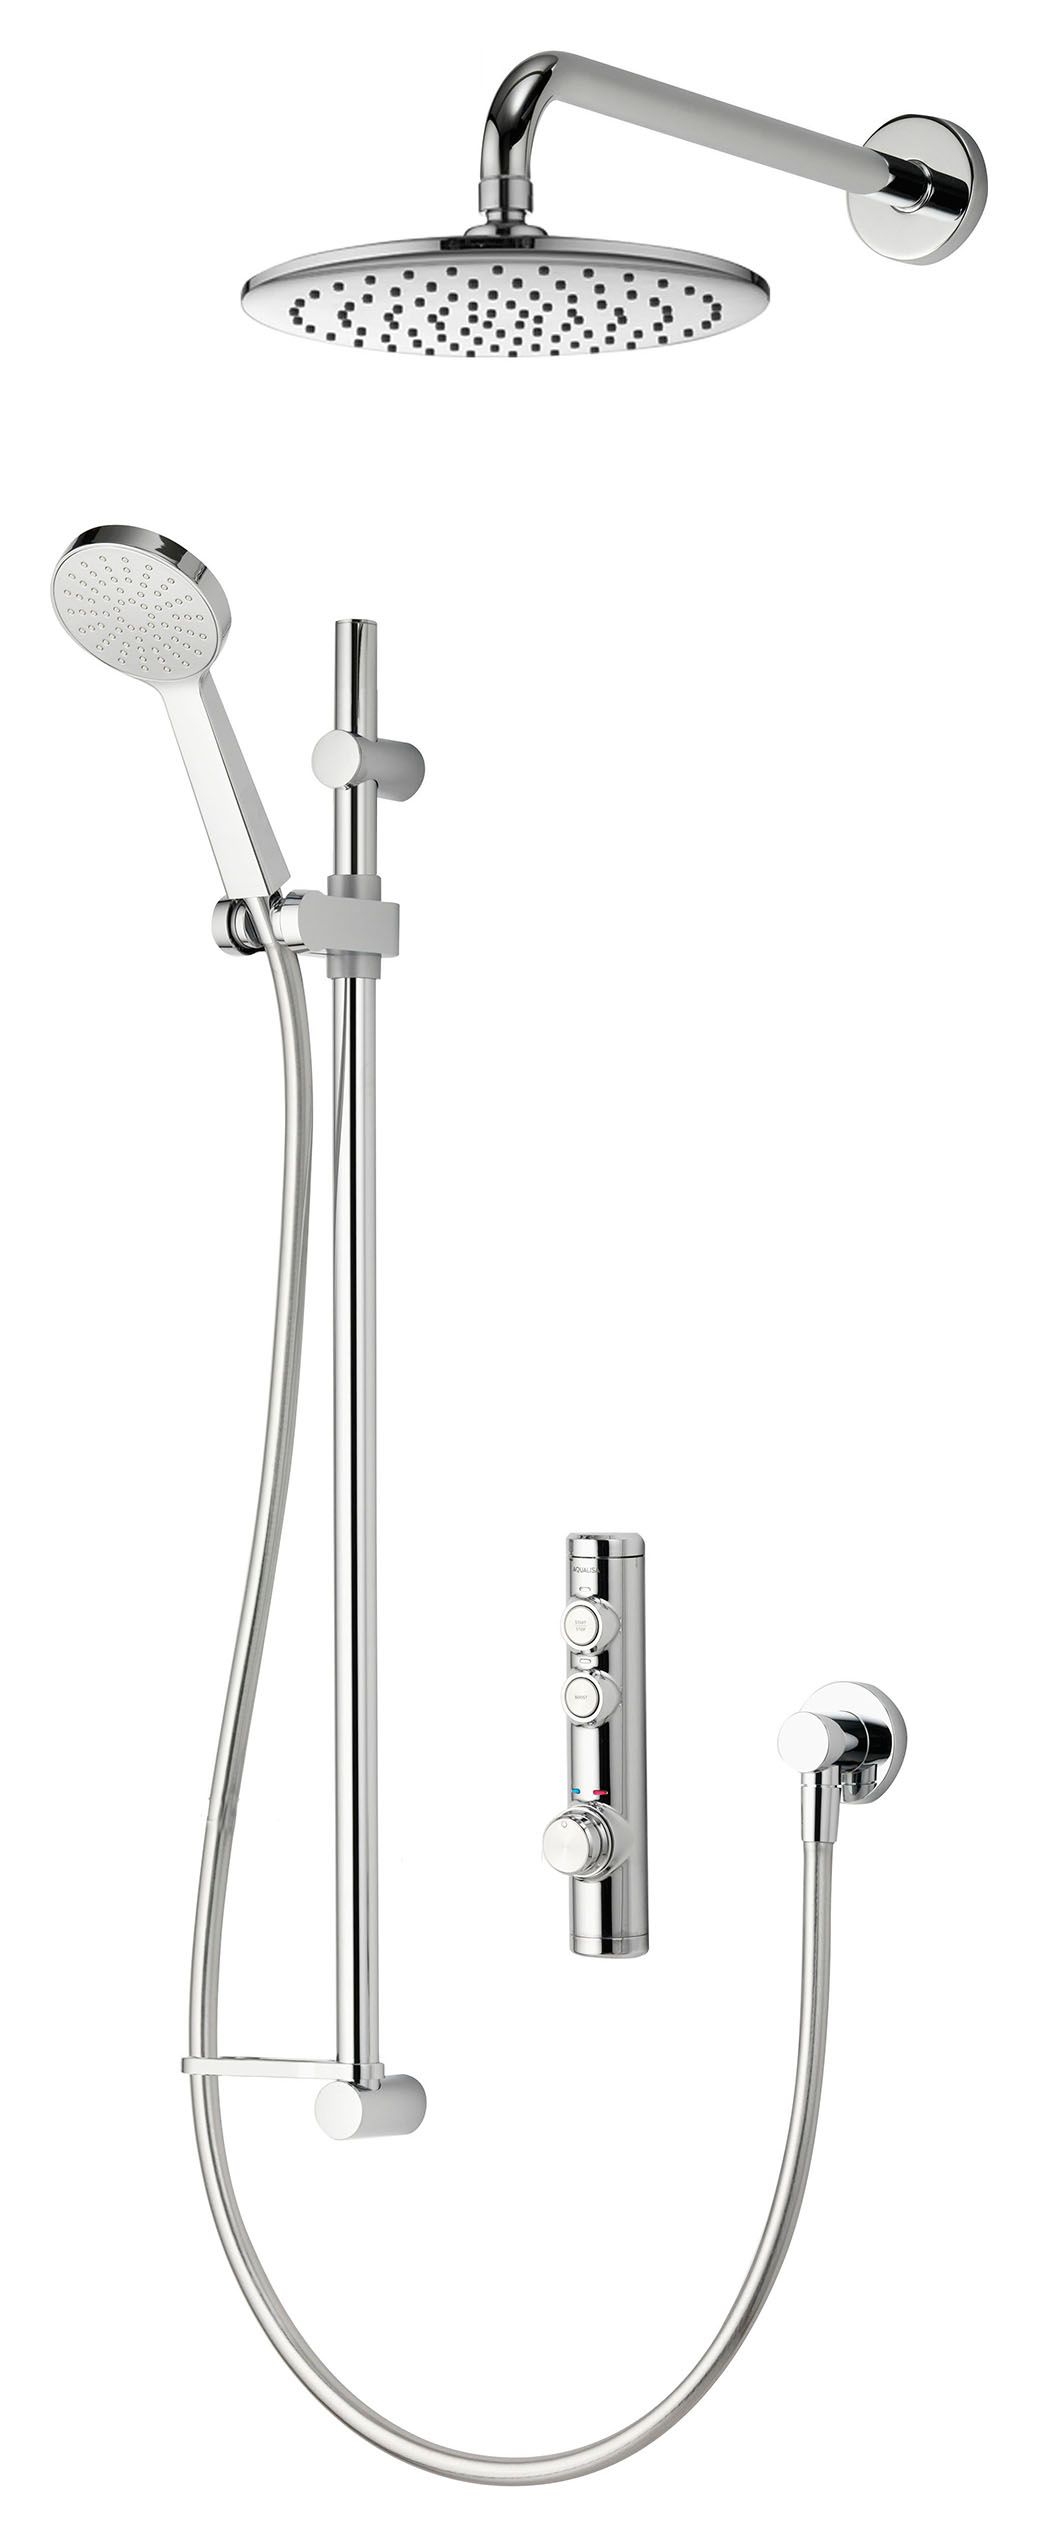 Image of Aqualisa iSystem Gravity Pumped Adjustable Concealed Digital Divert Shower with Wall Head